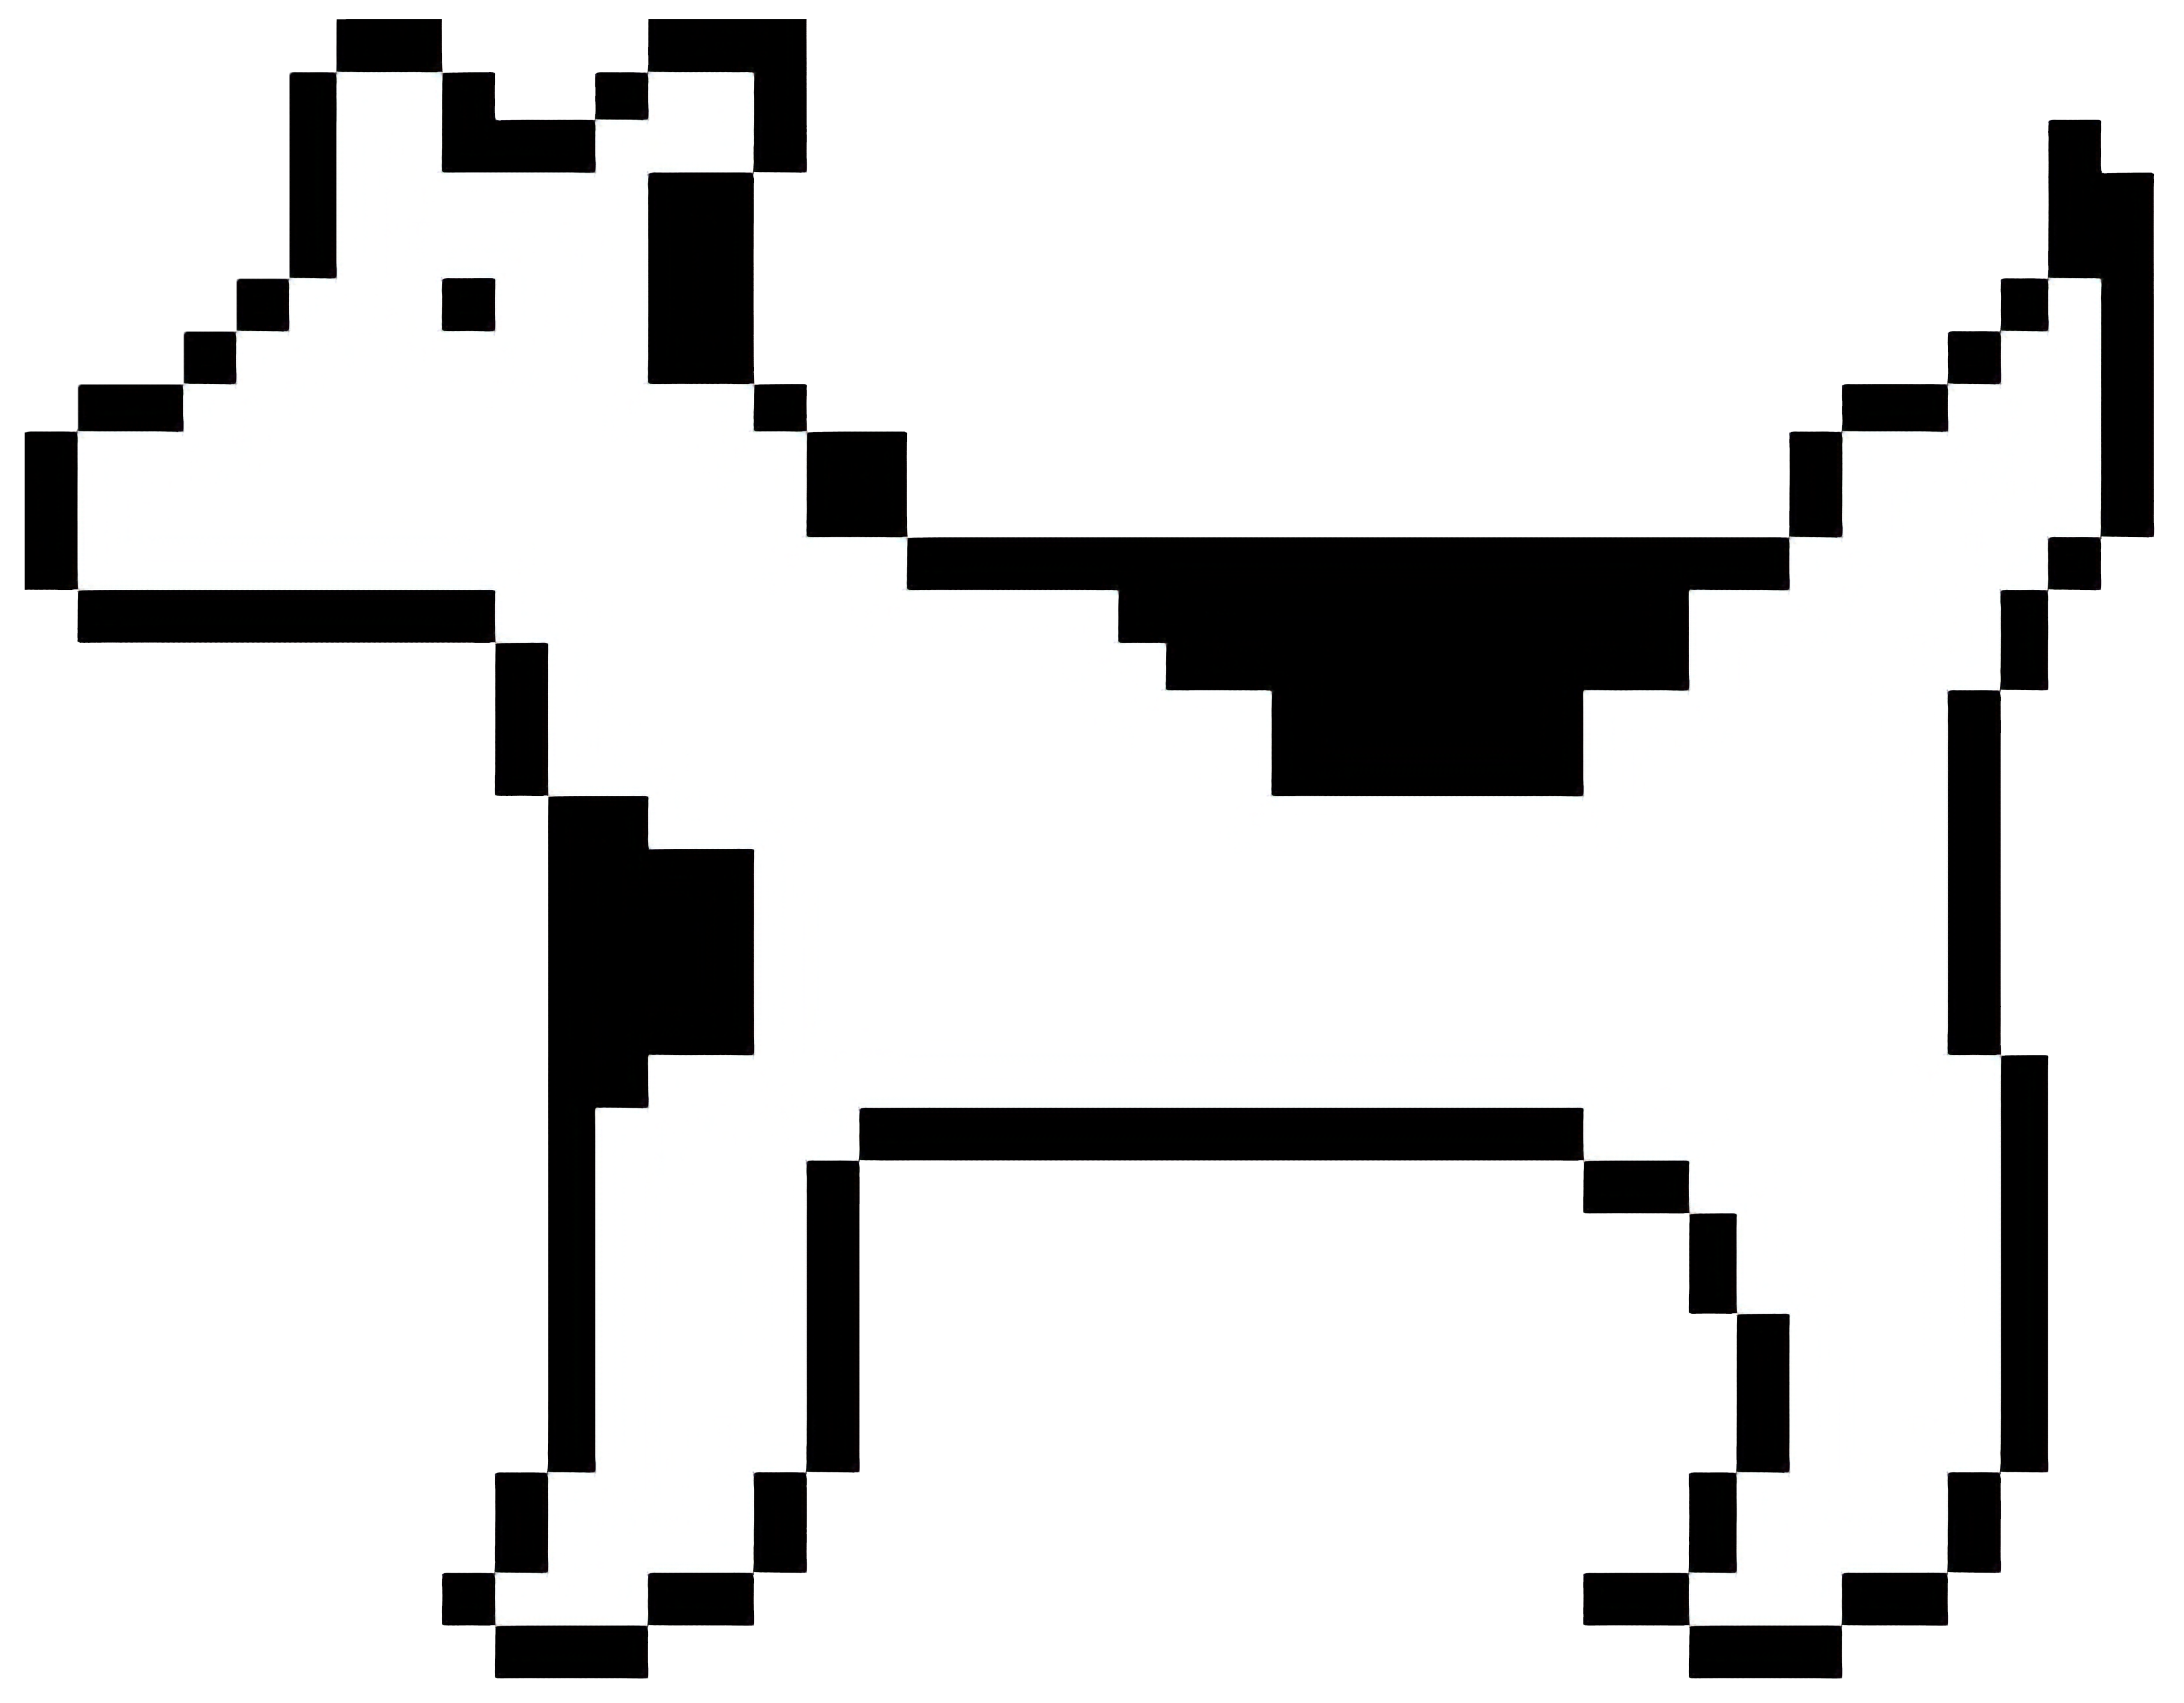 Clarus the Dogcow. Moof!